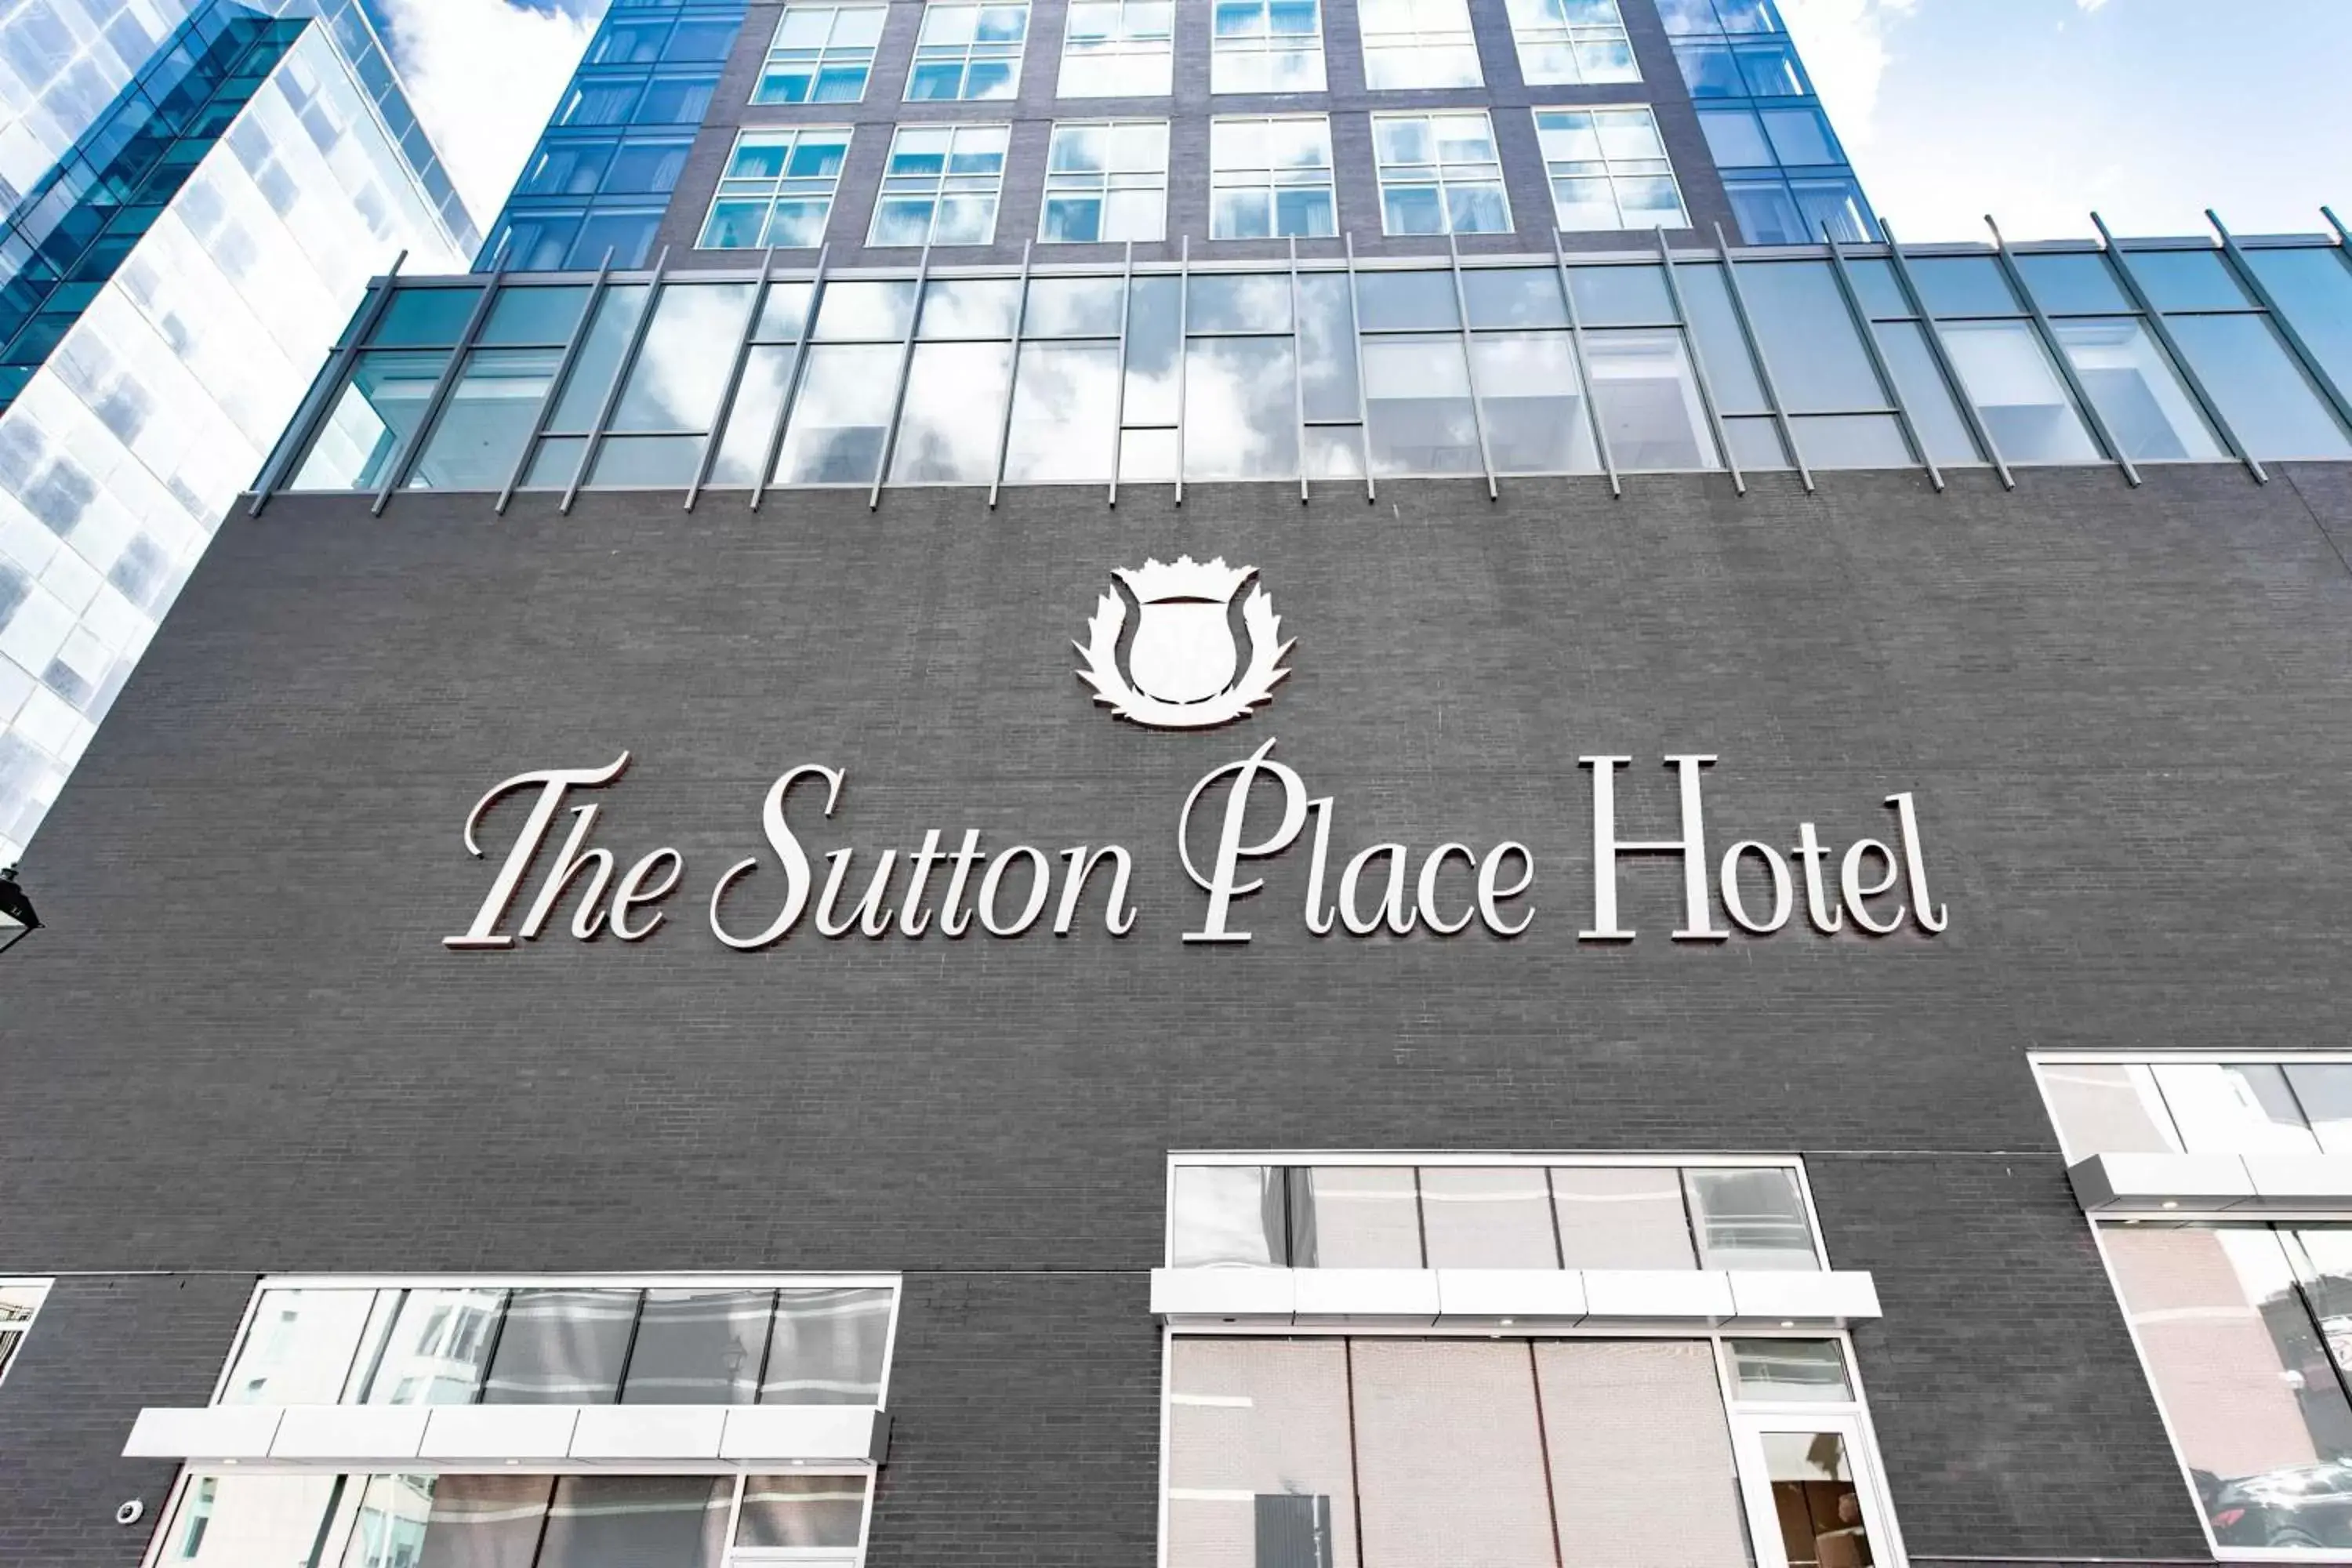 Logo/Certificate/Sign in The Sutton Place Hotel Halifax